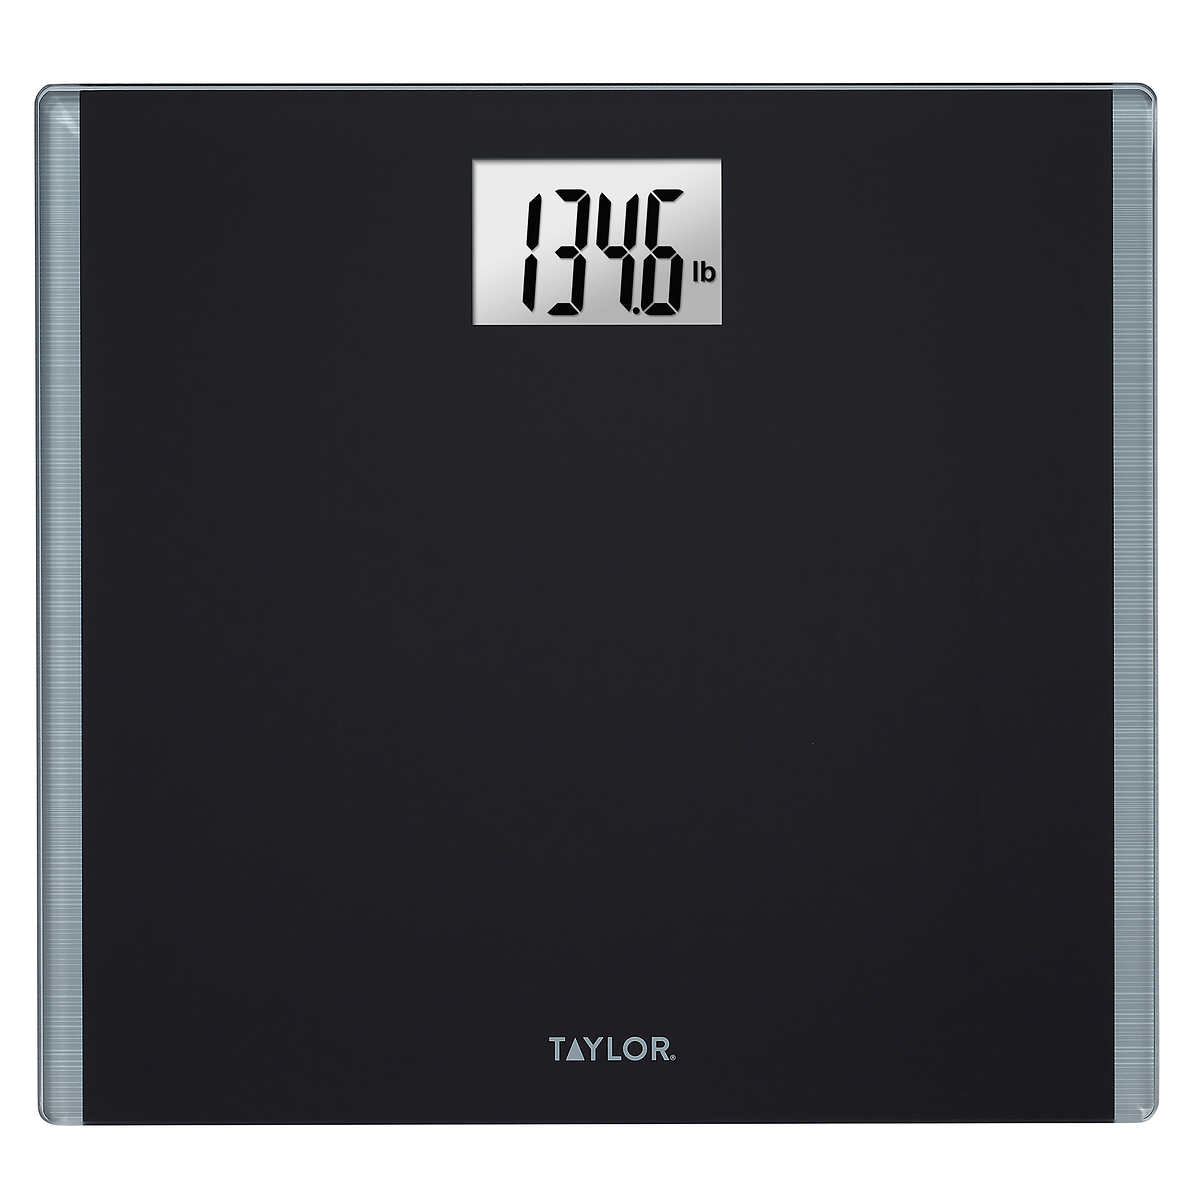 New and used Bathroom Scales for sale, Facebook Marketplace